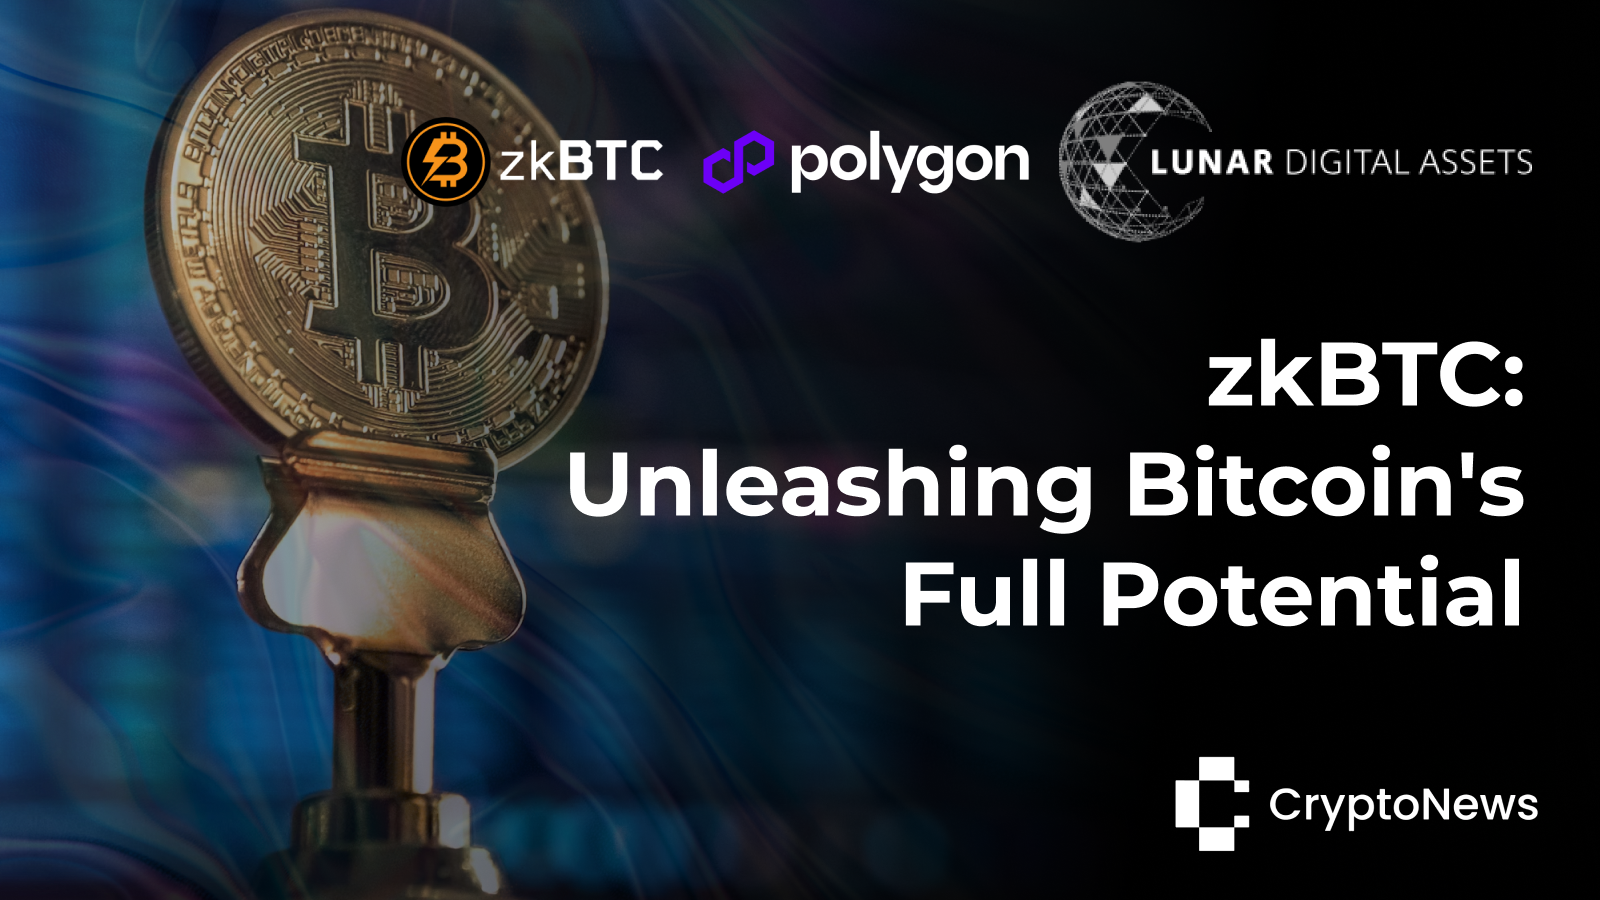 Image showcasing a Bitcoin secured by a key, with logos of zkBTC, Polygon, and Lunar Digital Assets. Text highlights zkBTC as a solution to Bitcoin's scalability issues with support from Polygon and Lunar Digital Assets.